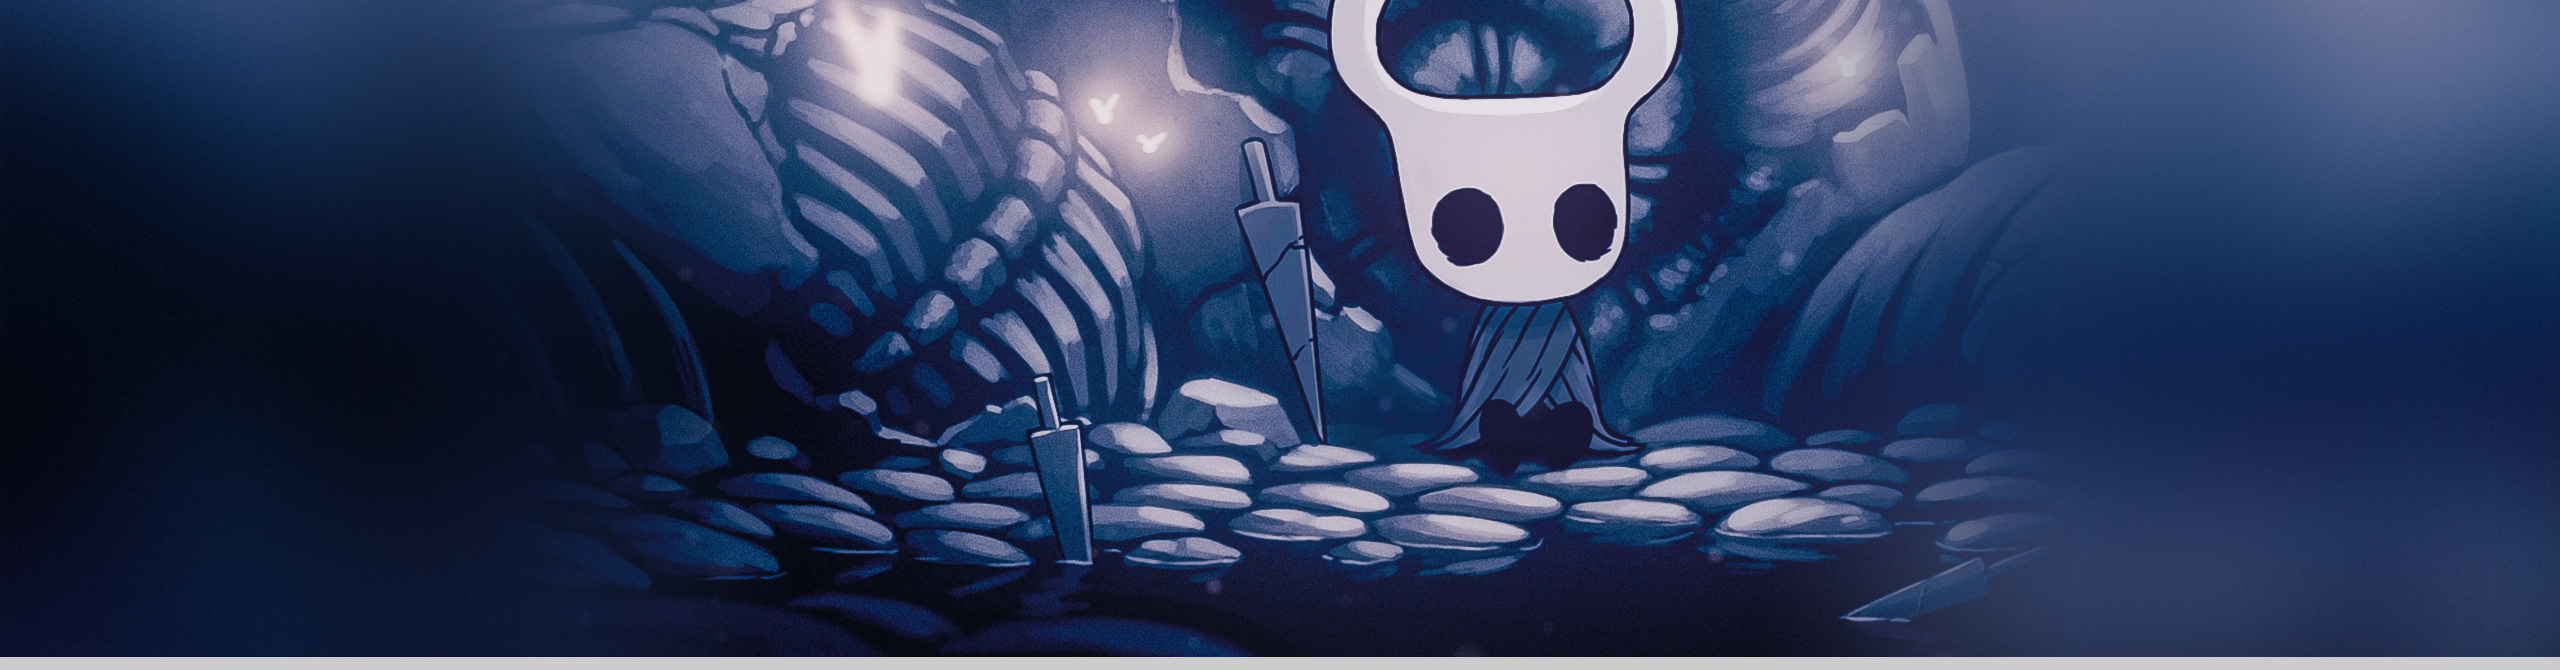 download hollow knight song